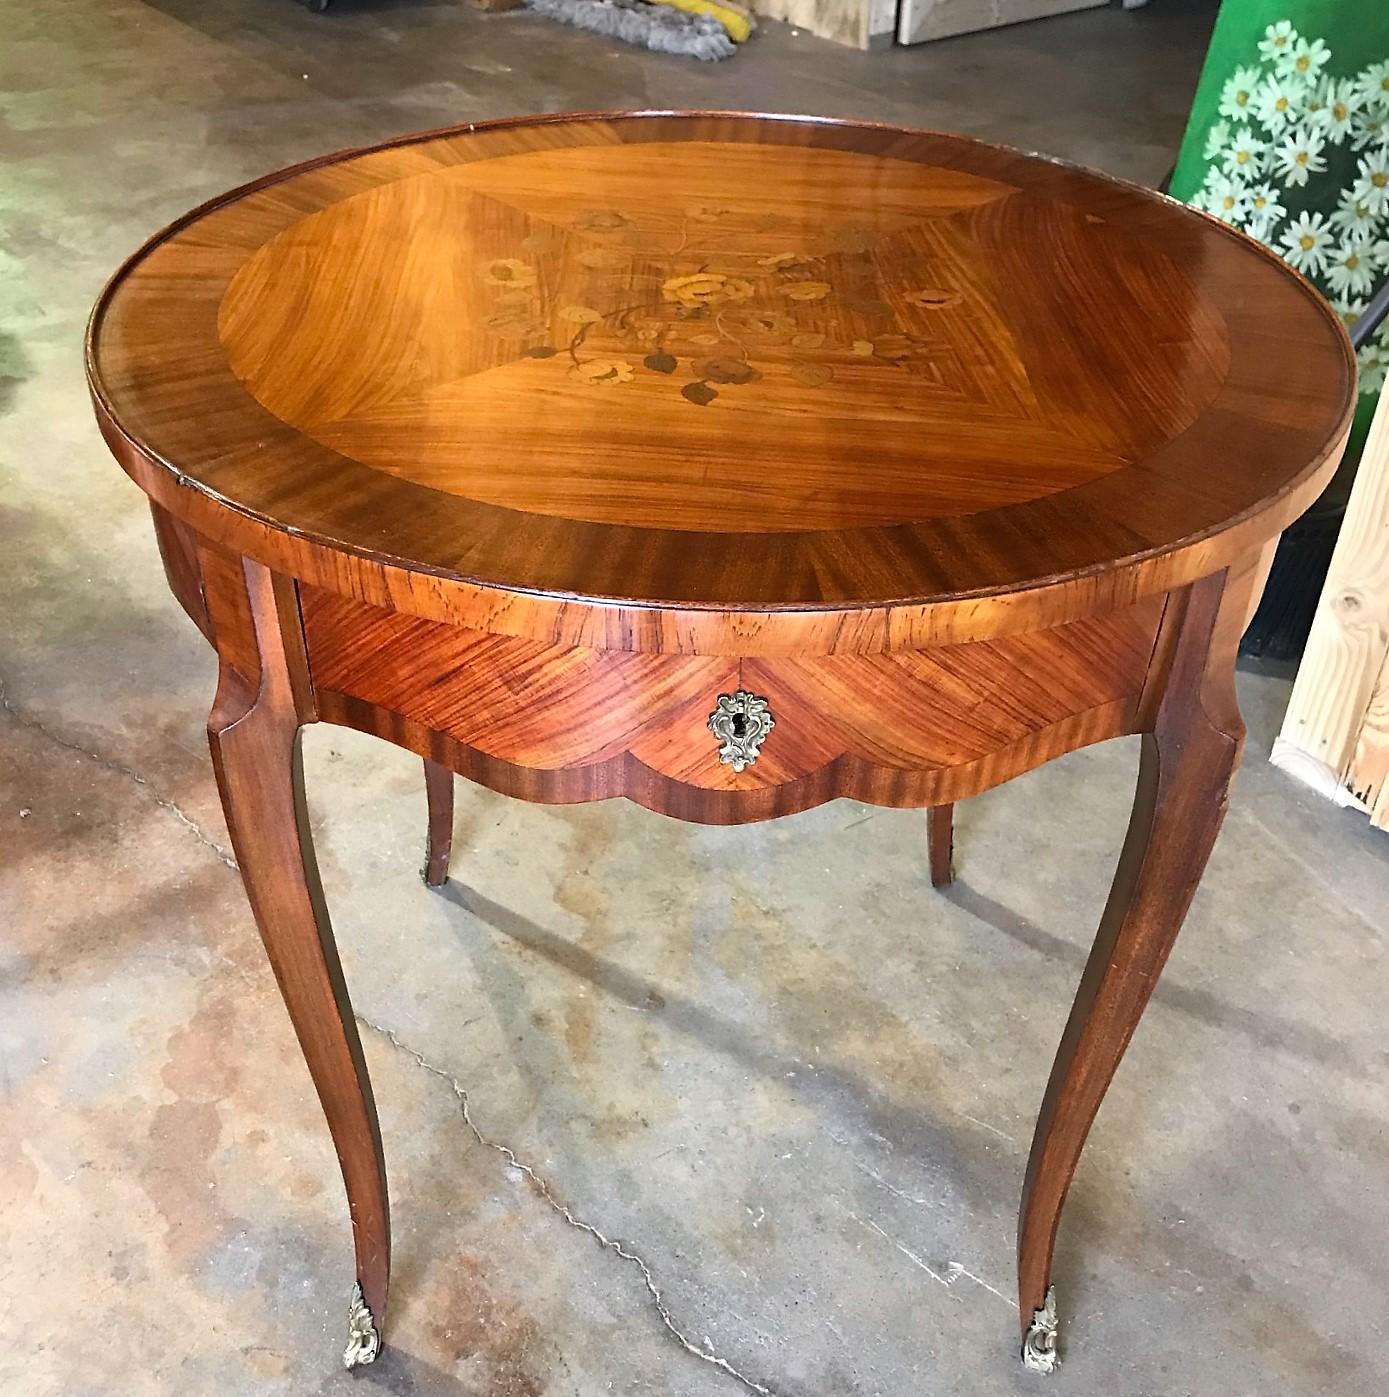 Fabulous 19th century Louis XV style single-drawer kingwood occasional table with mahogany crossbanding. The top with fine marquetry inlays in exotic woods and depicting flowering vines and leaves. The entire on cabriole legs ending in cast bronze